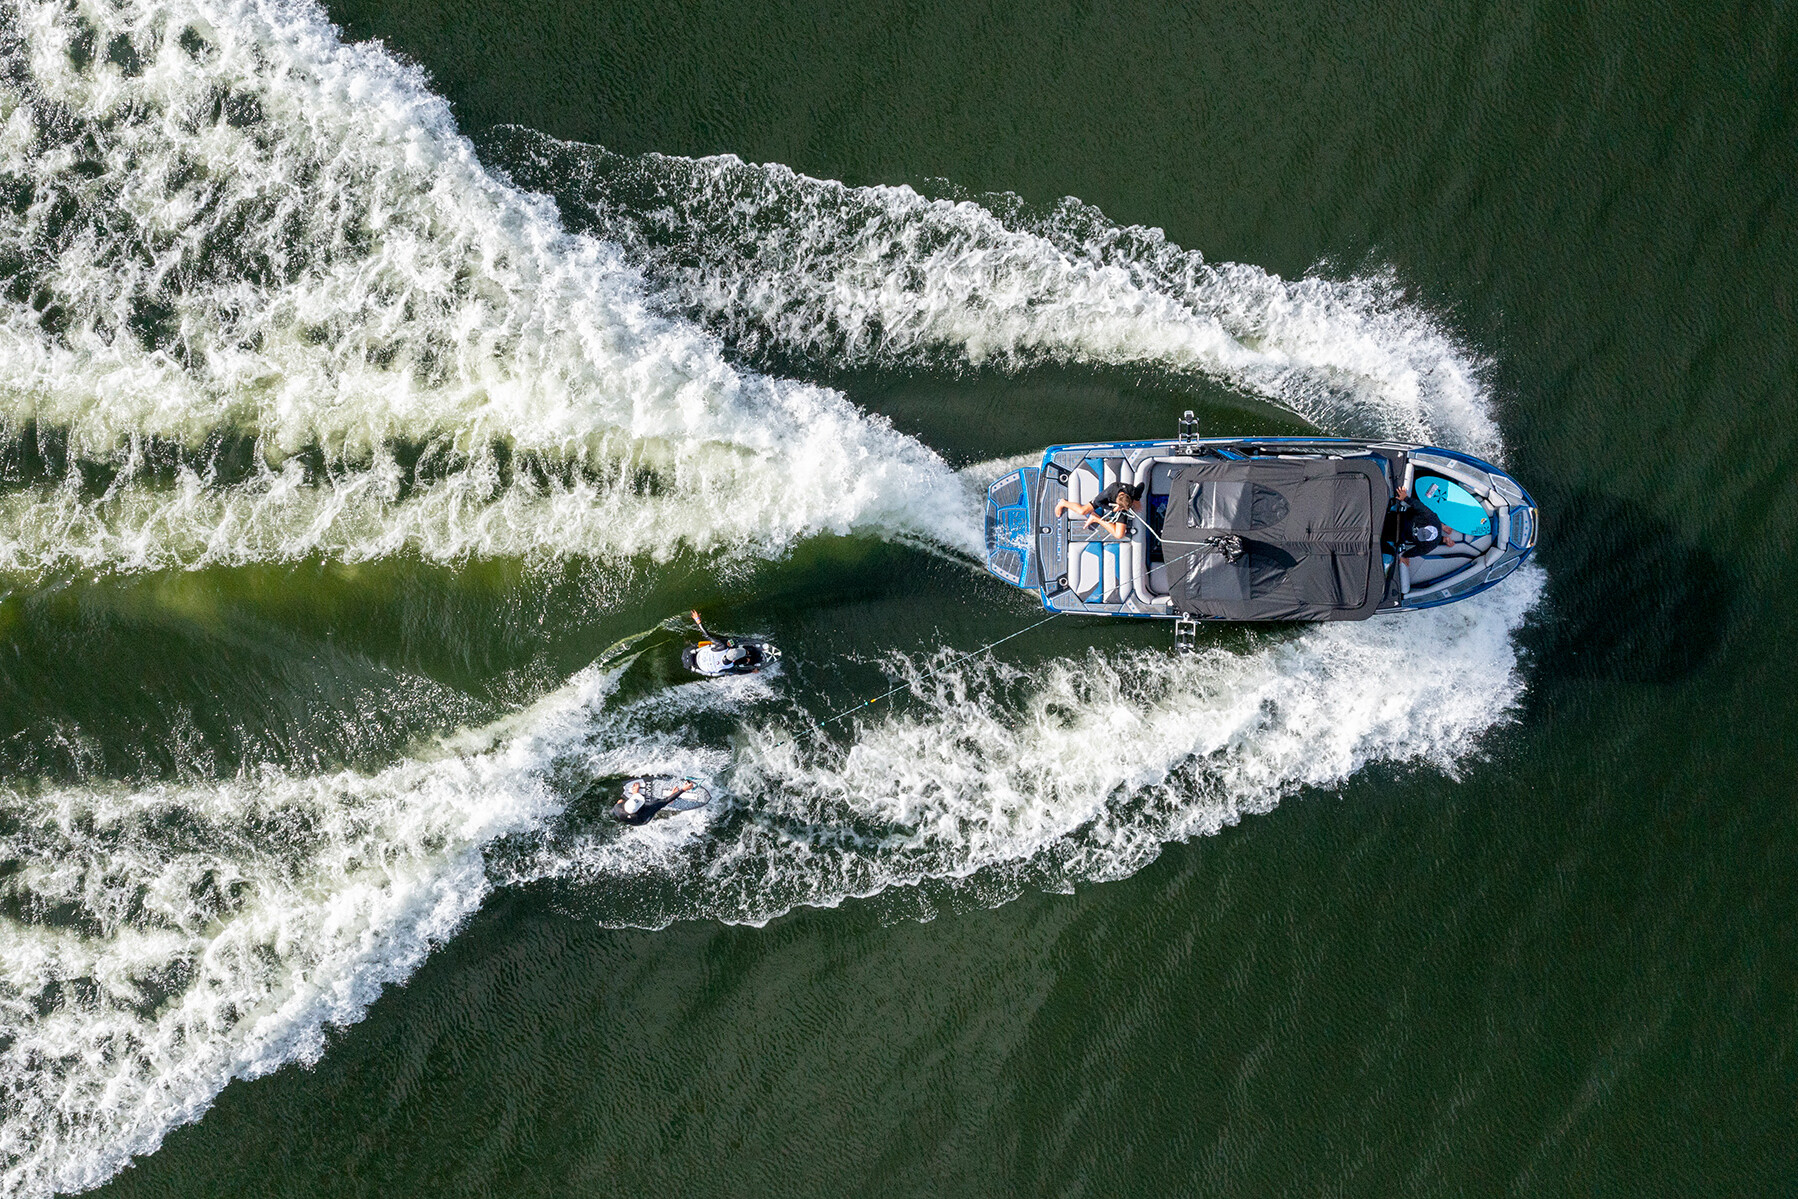 An aerial view of two surfers riding a boat in the water.